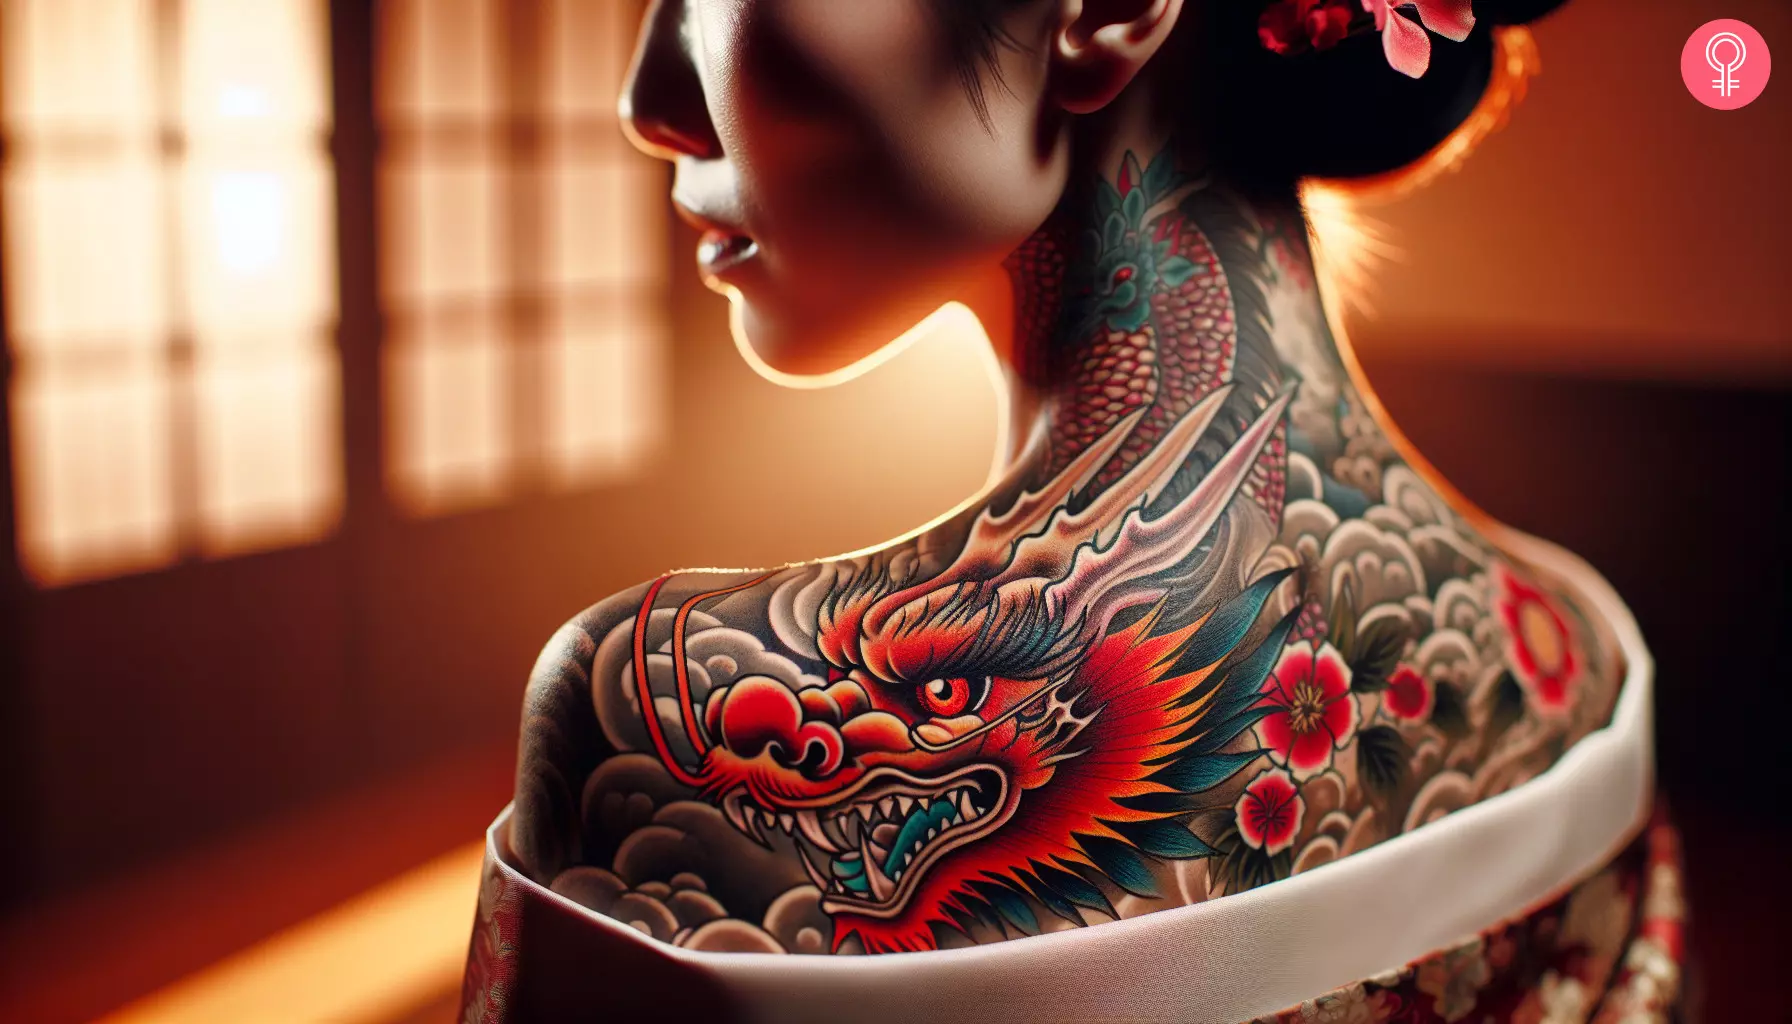 A colorful tattoo with a red dragon face at the back of the shoulder